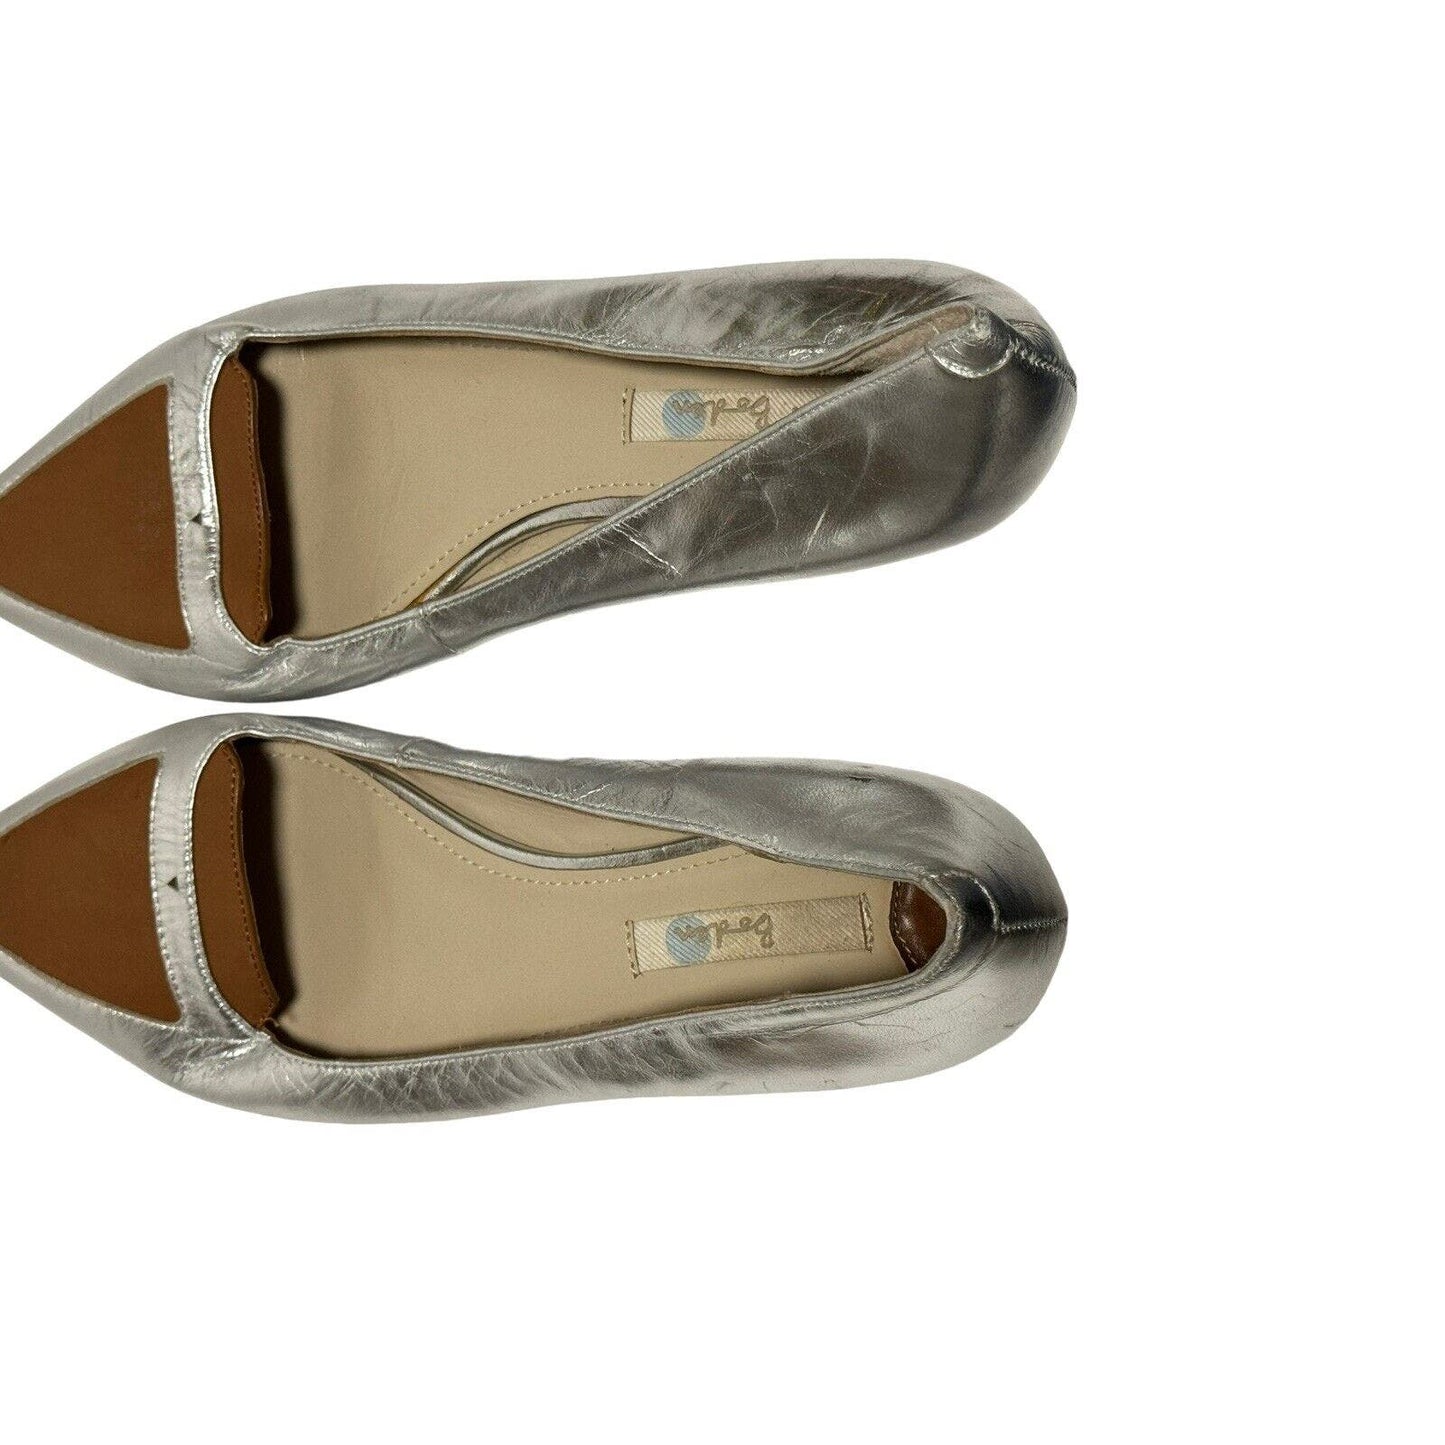 Boden Patent Leather Sliver Brown Pointed Ballet Flats Slip On Shoes 37.5 US 6.5